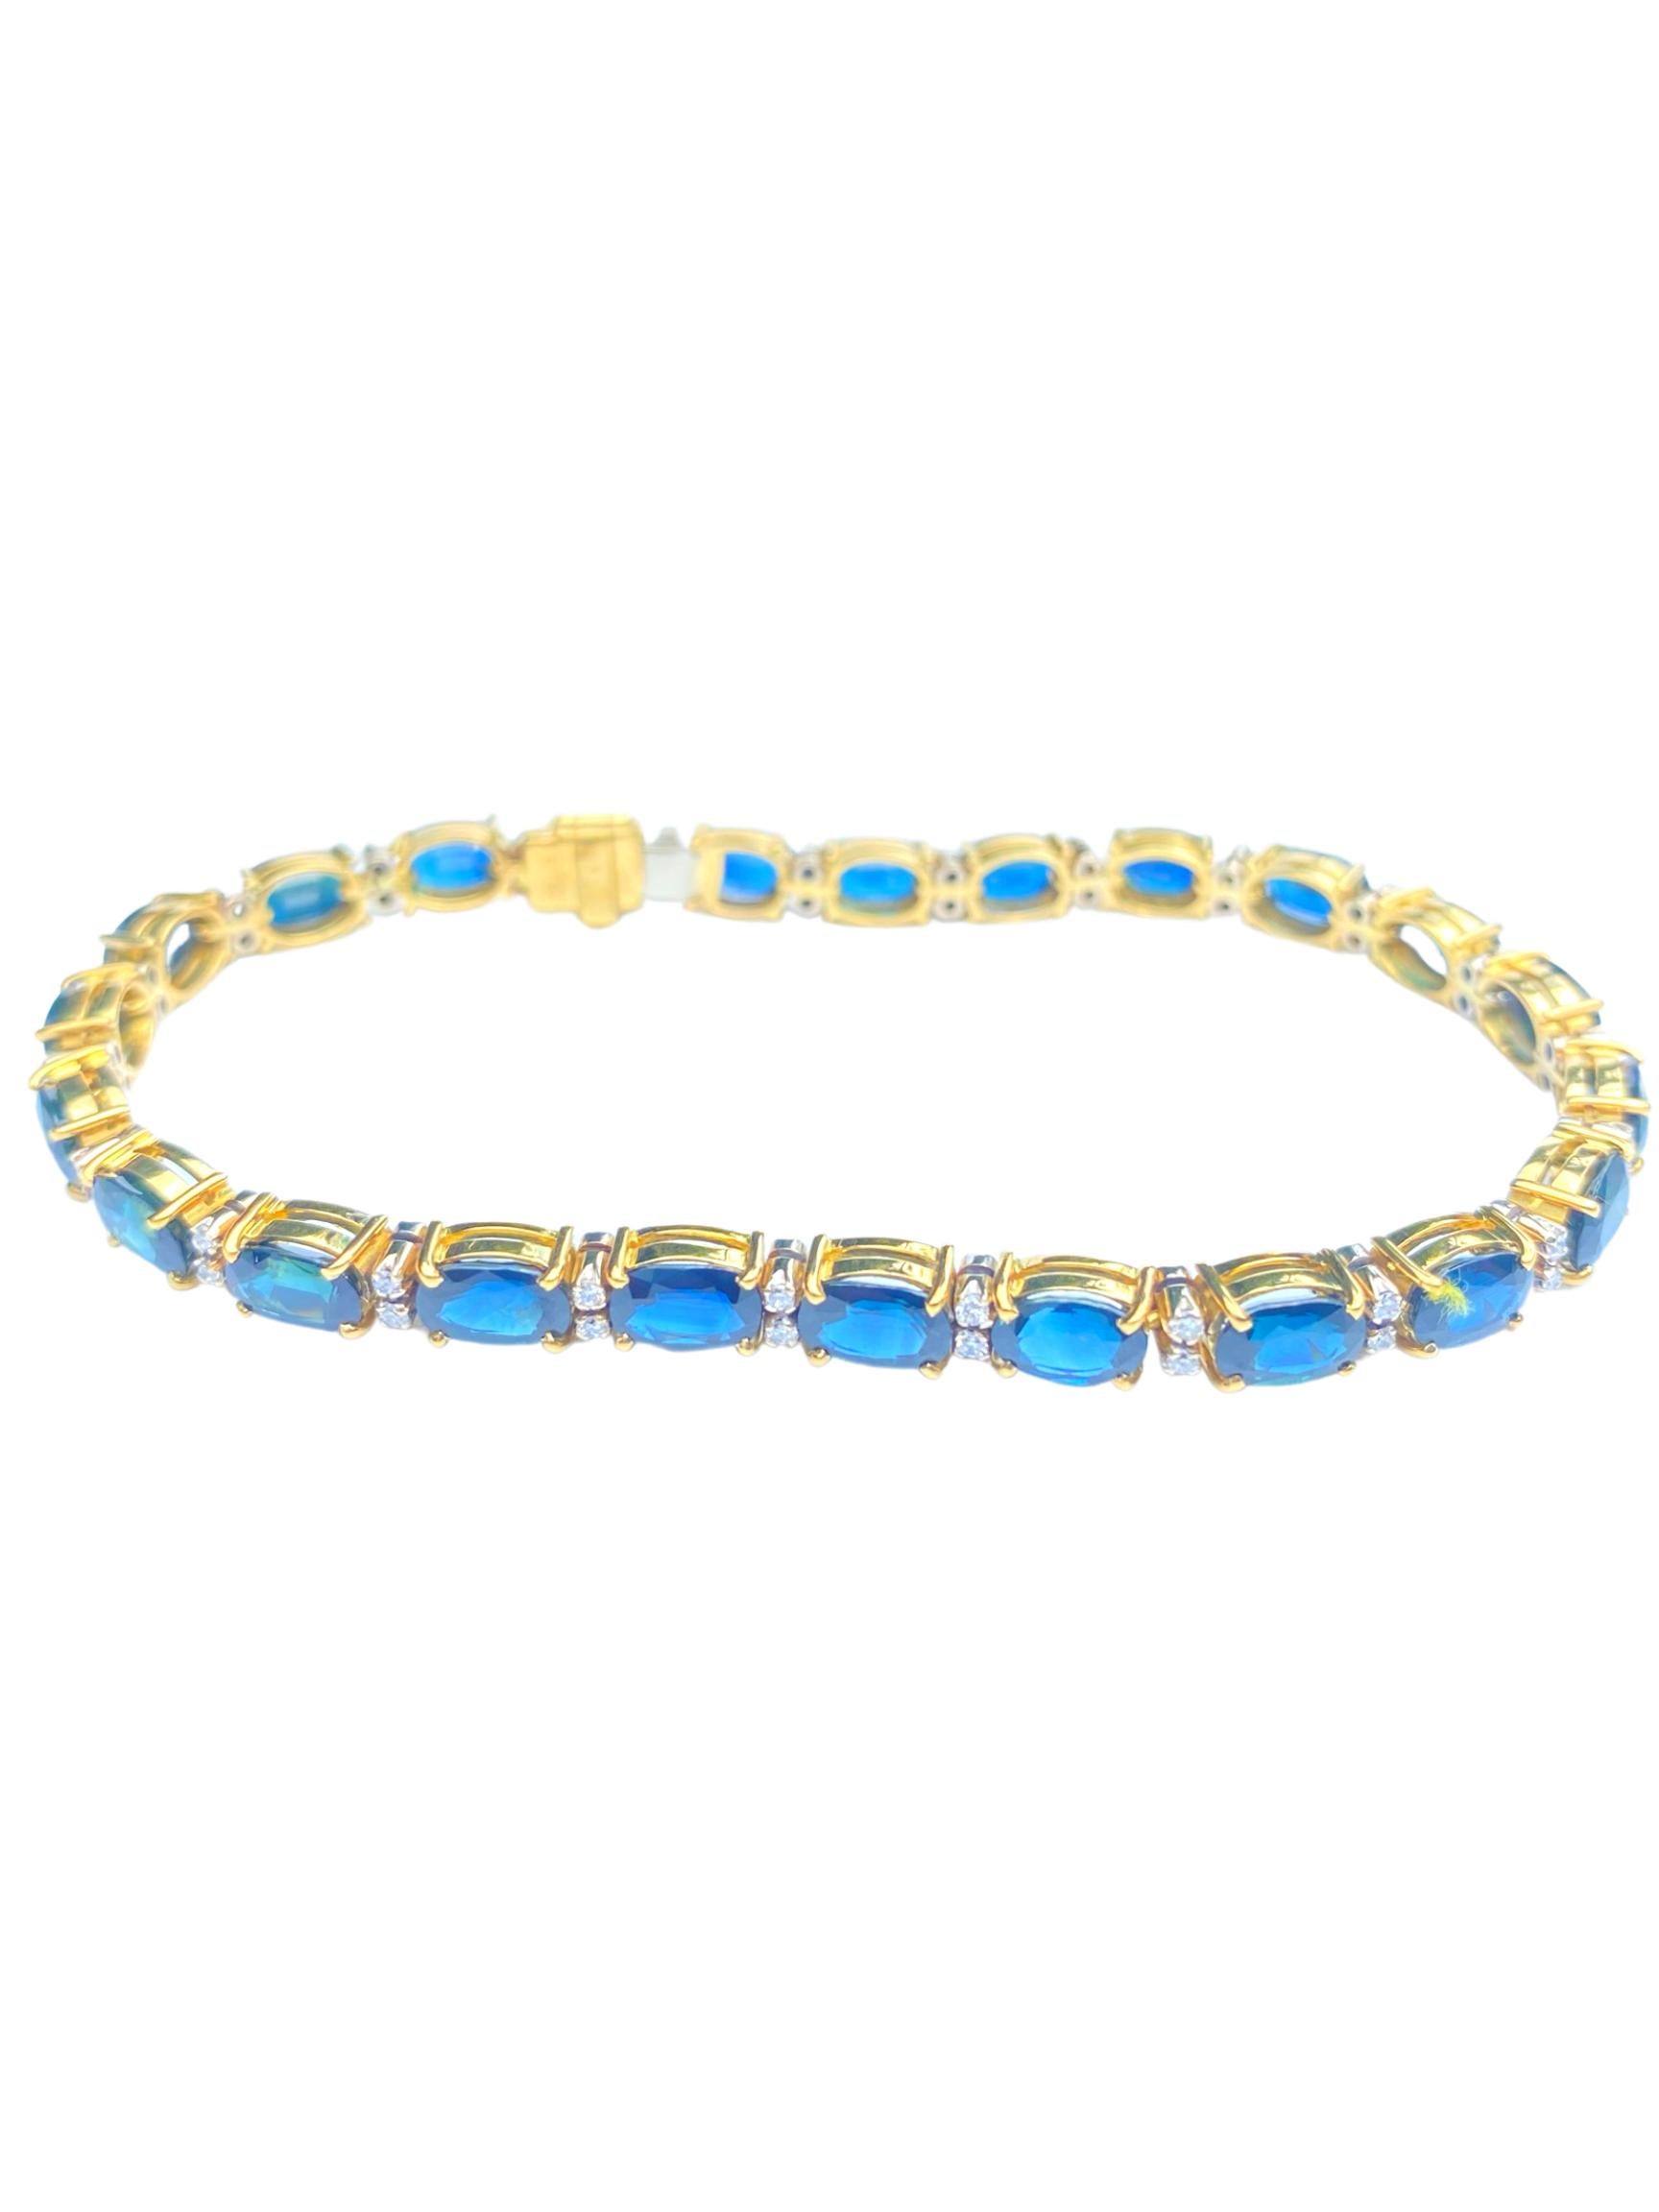 Oval-Cut Blue Sapphire and Diamond 18K Yellow Gold Bracelet In Excellent Condition For Sale In Miami, FL